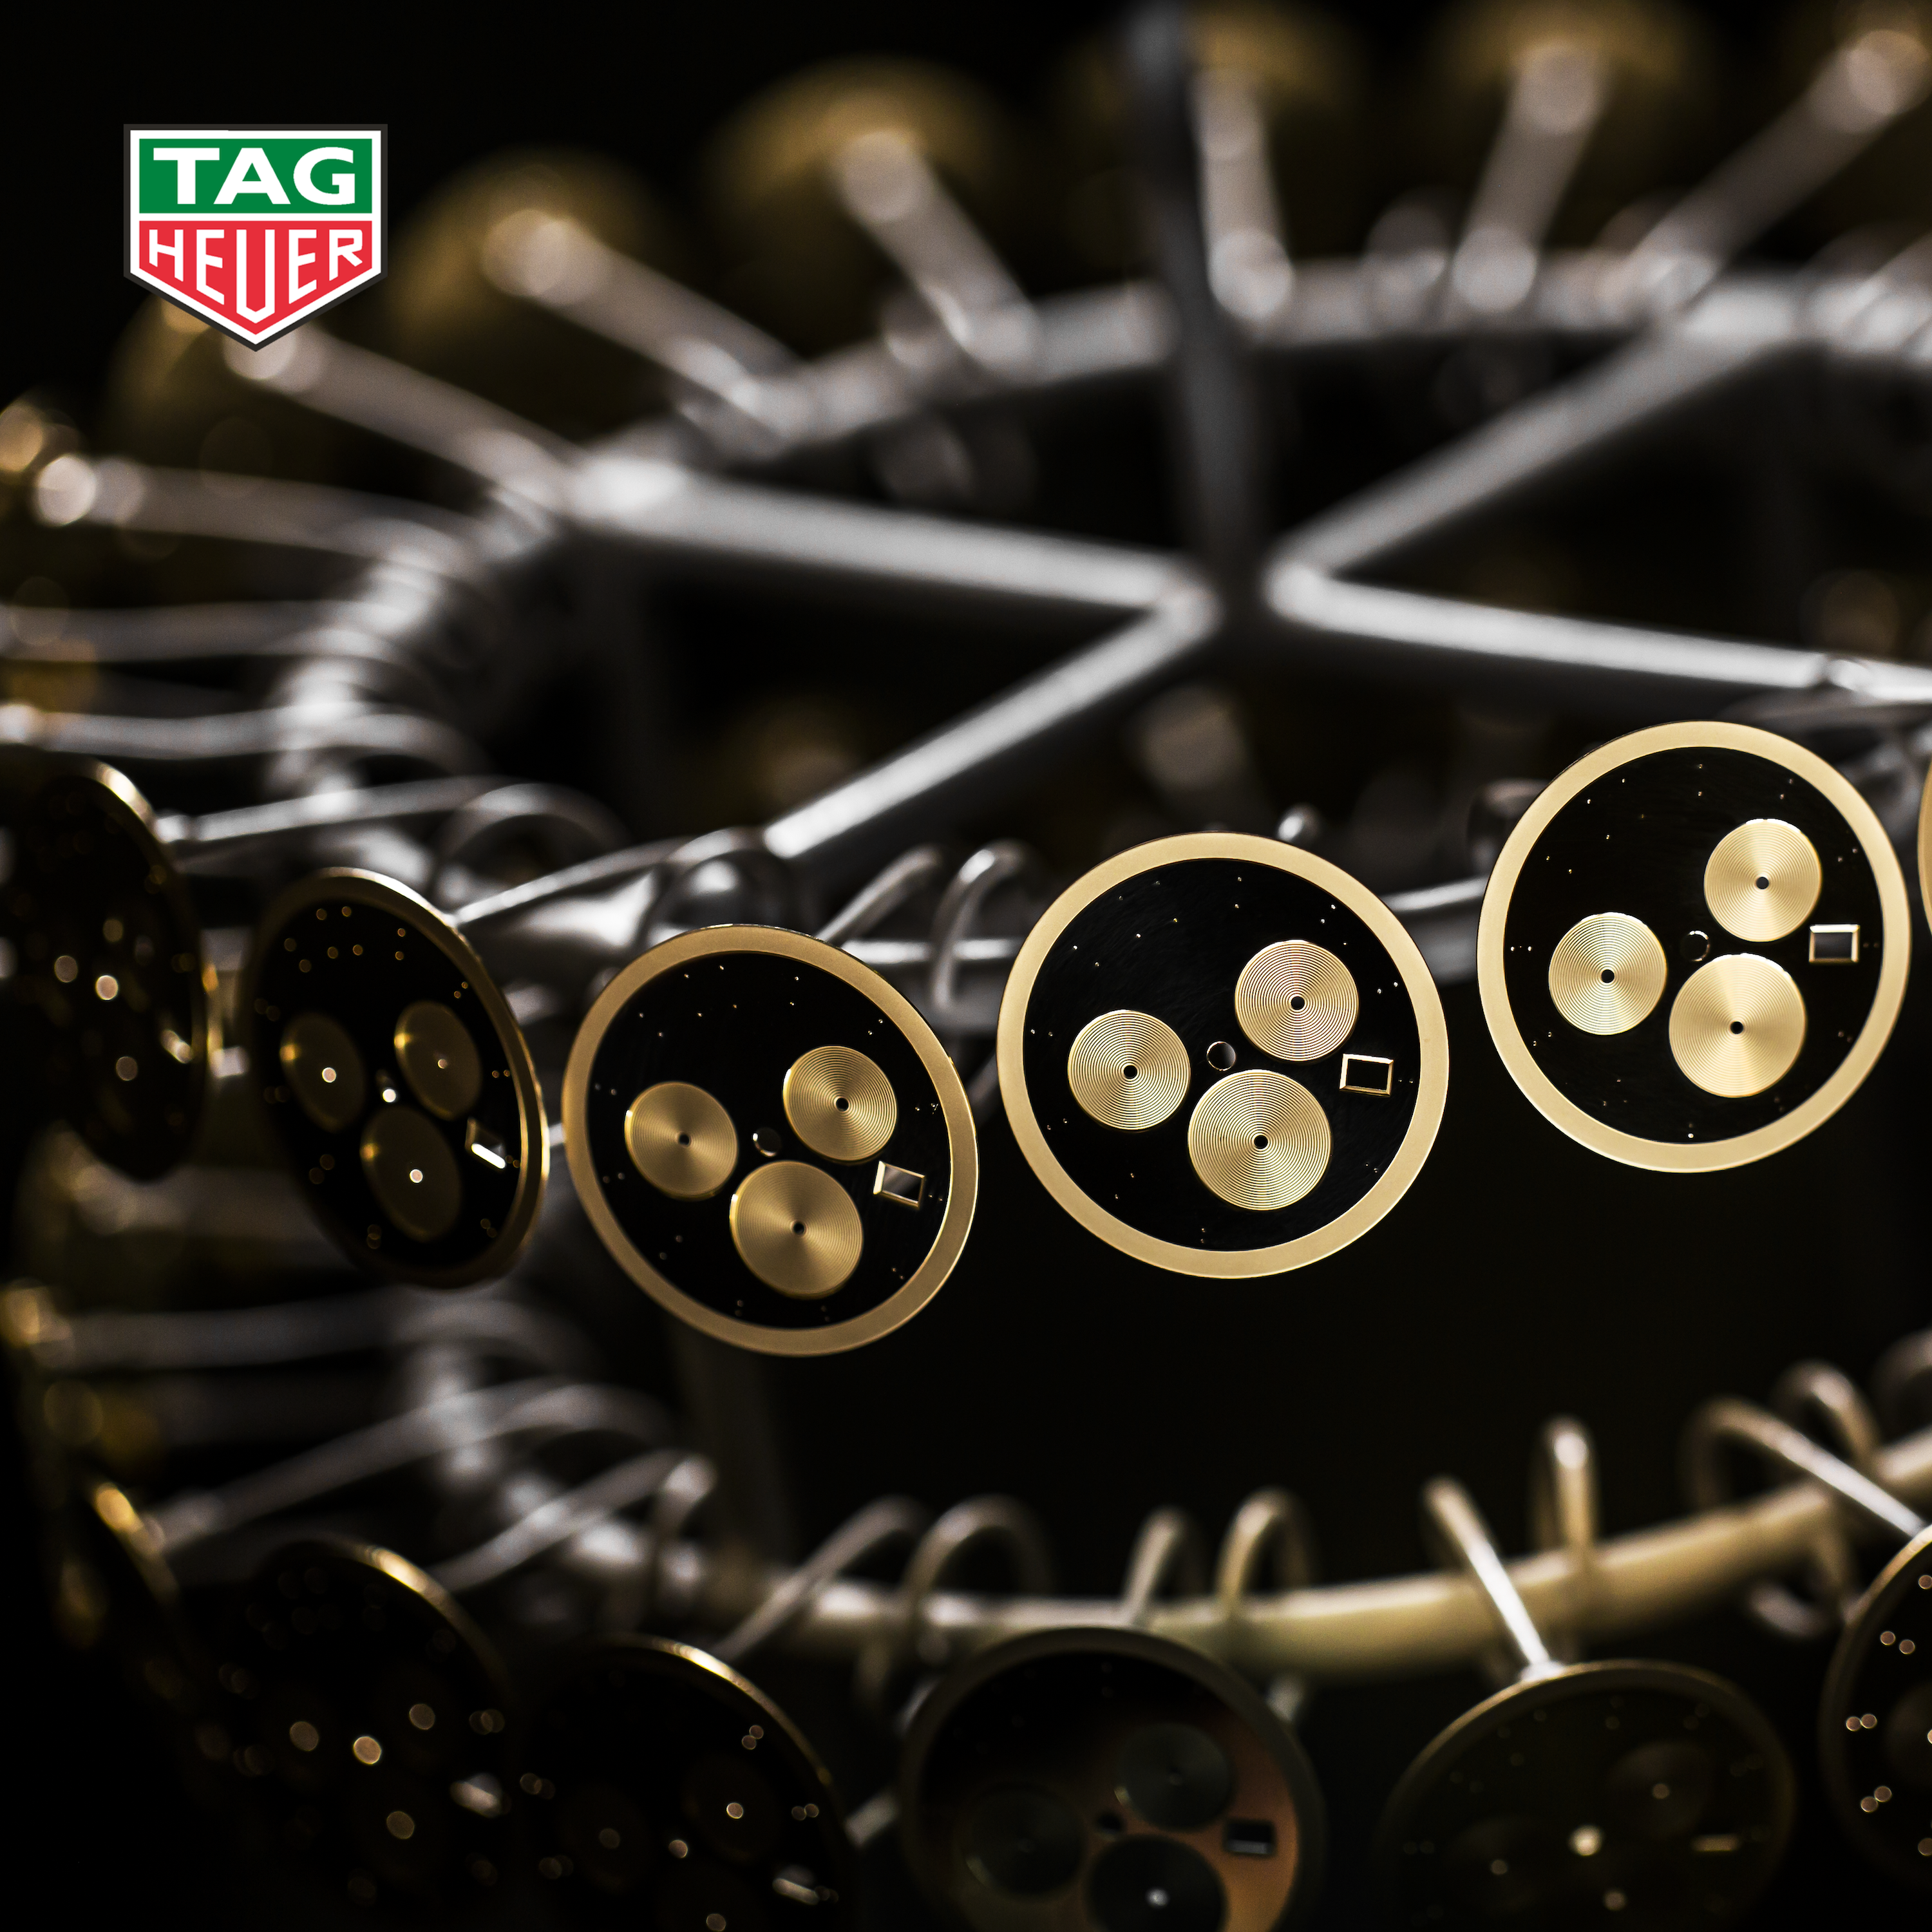 Part 1 - How a TAG Heuer dial is created